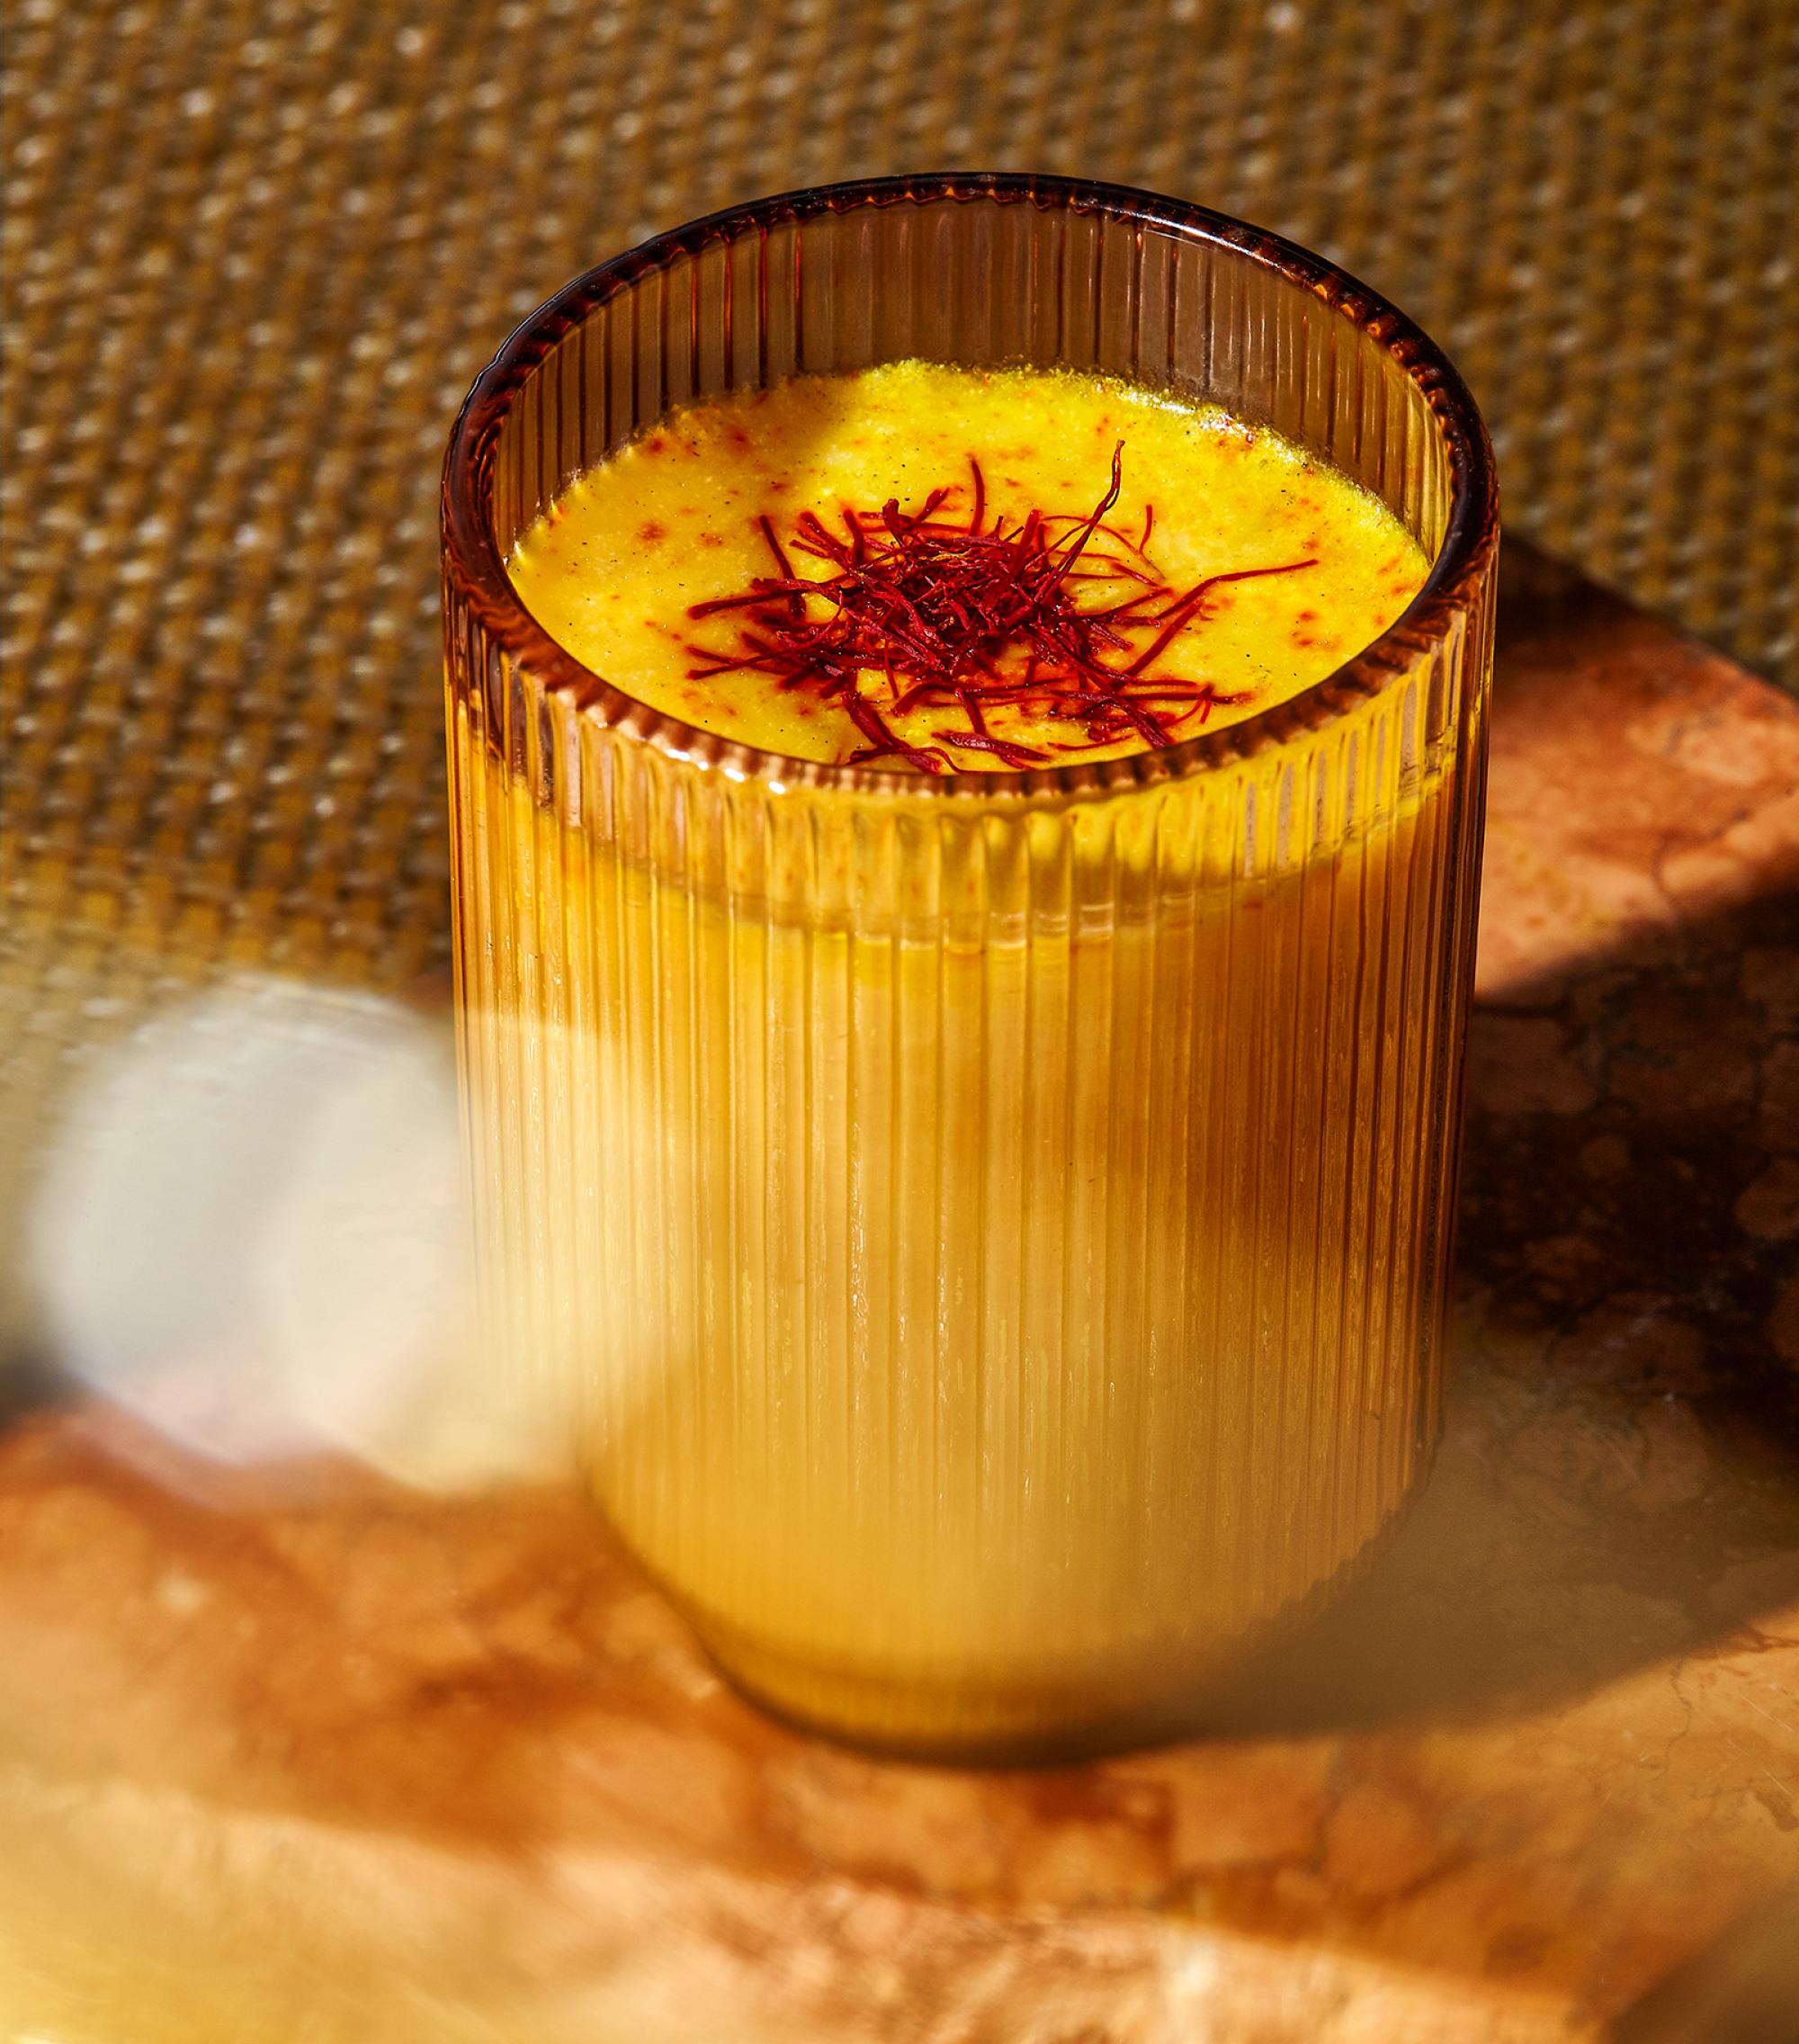 A glass of THE FULLEST Warm Feelings, a golden-hued caffeine-free latte garnished with red saffron strands, on a textured surface.